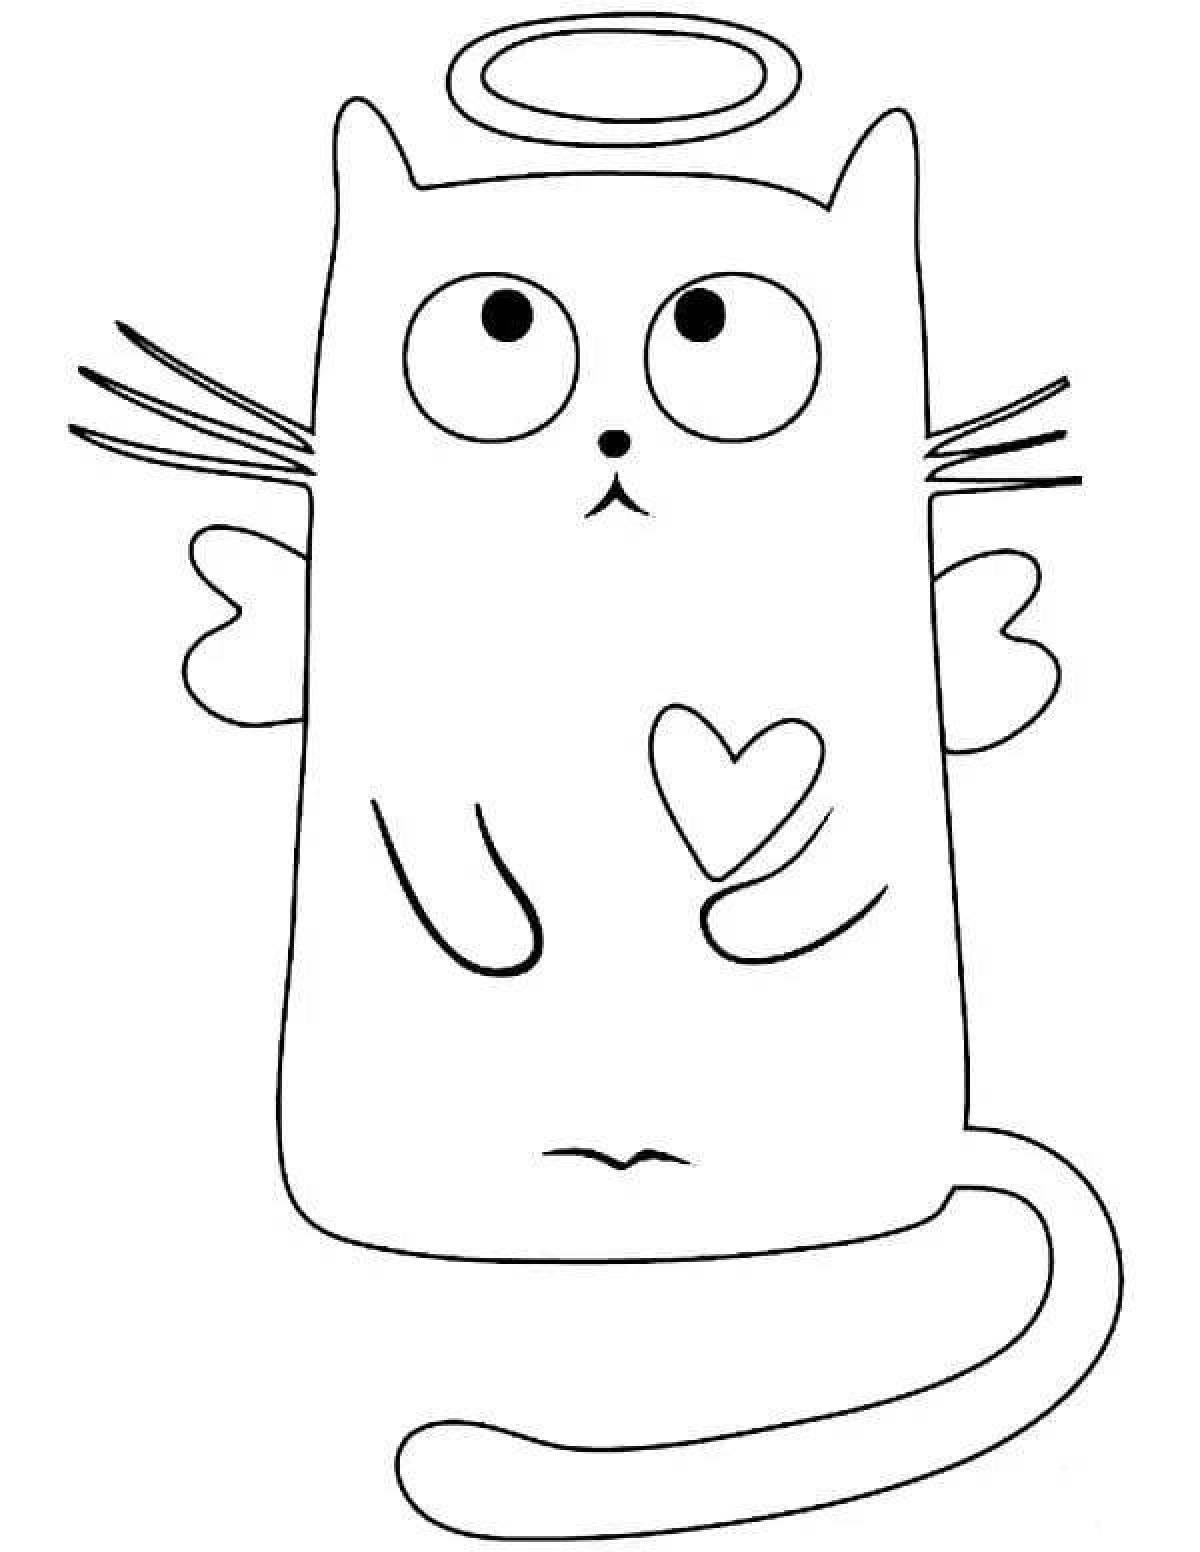 Funny cat bubble coloring pages